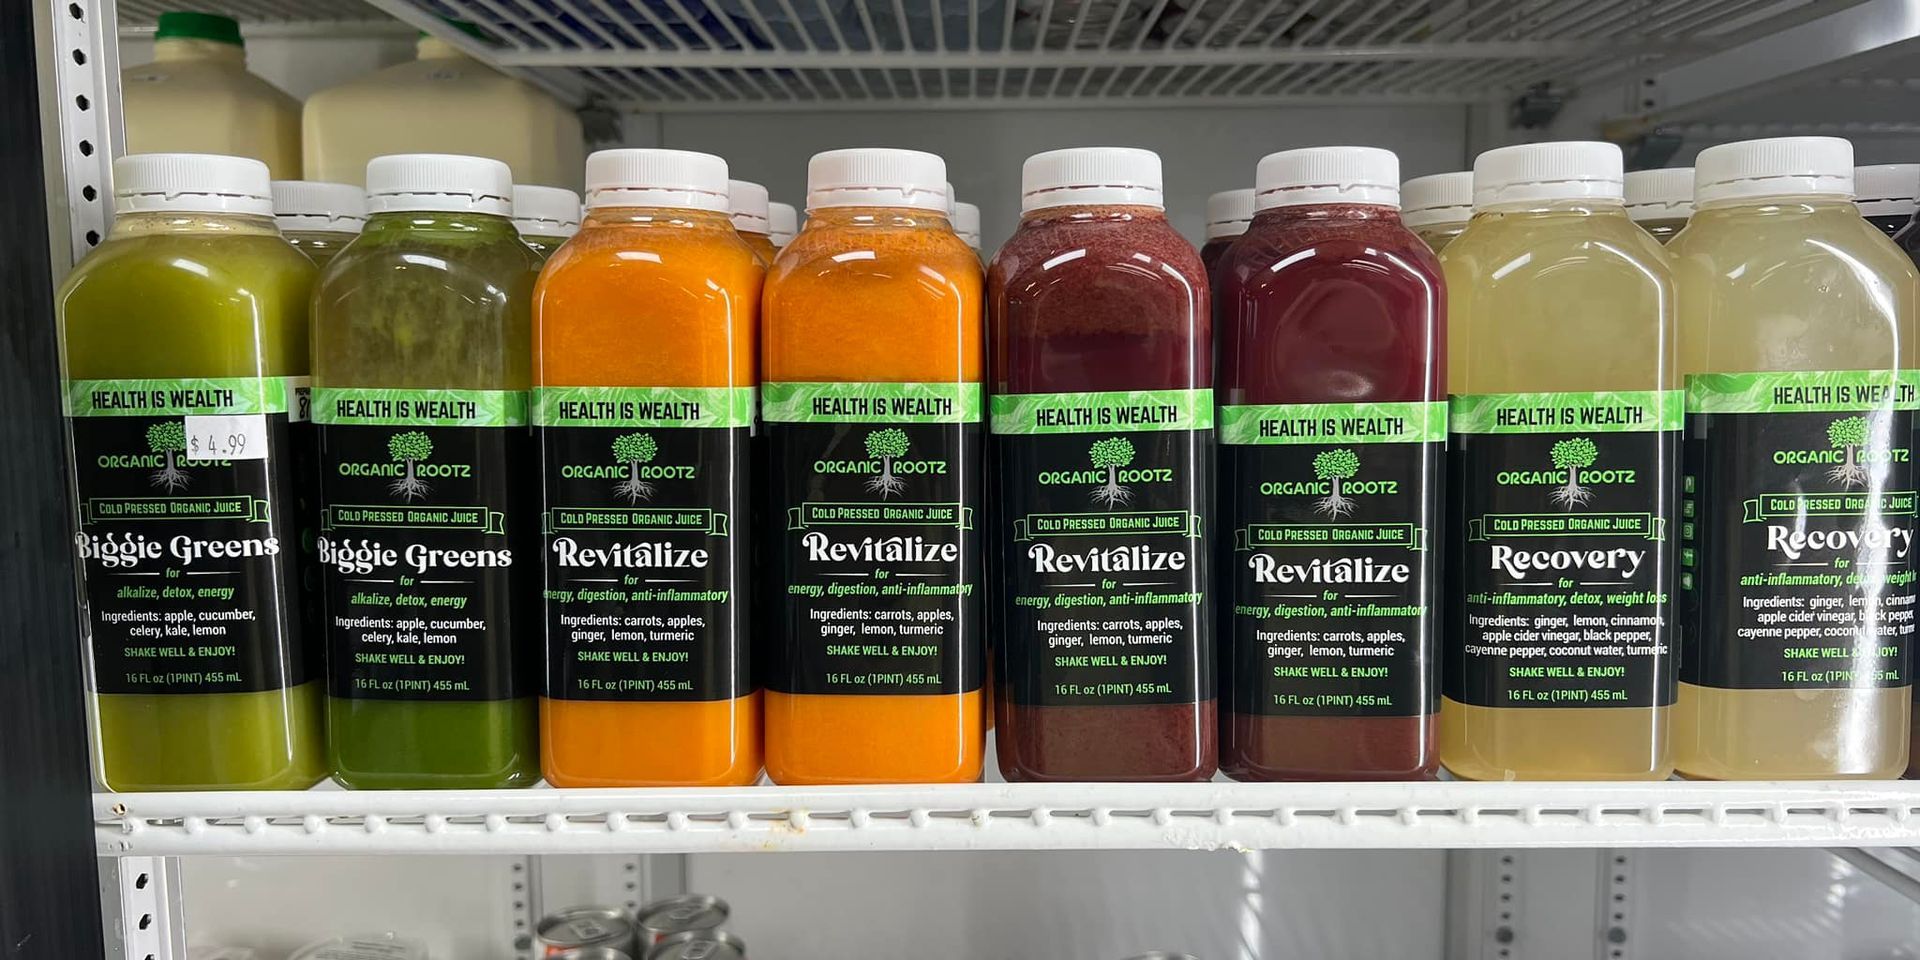 bottles of juice are lined up on a shelf in a refrigerator .